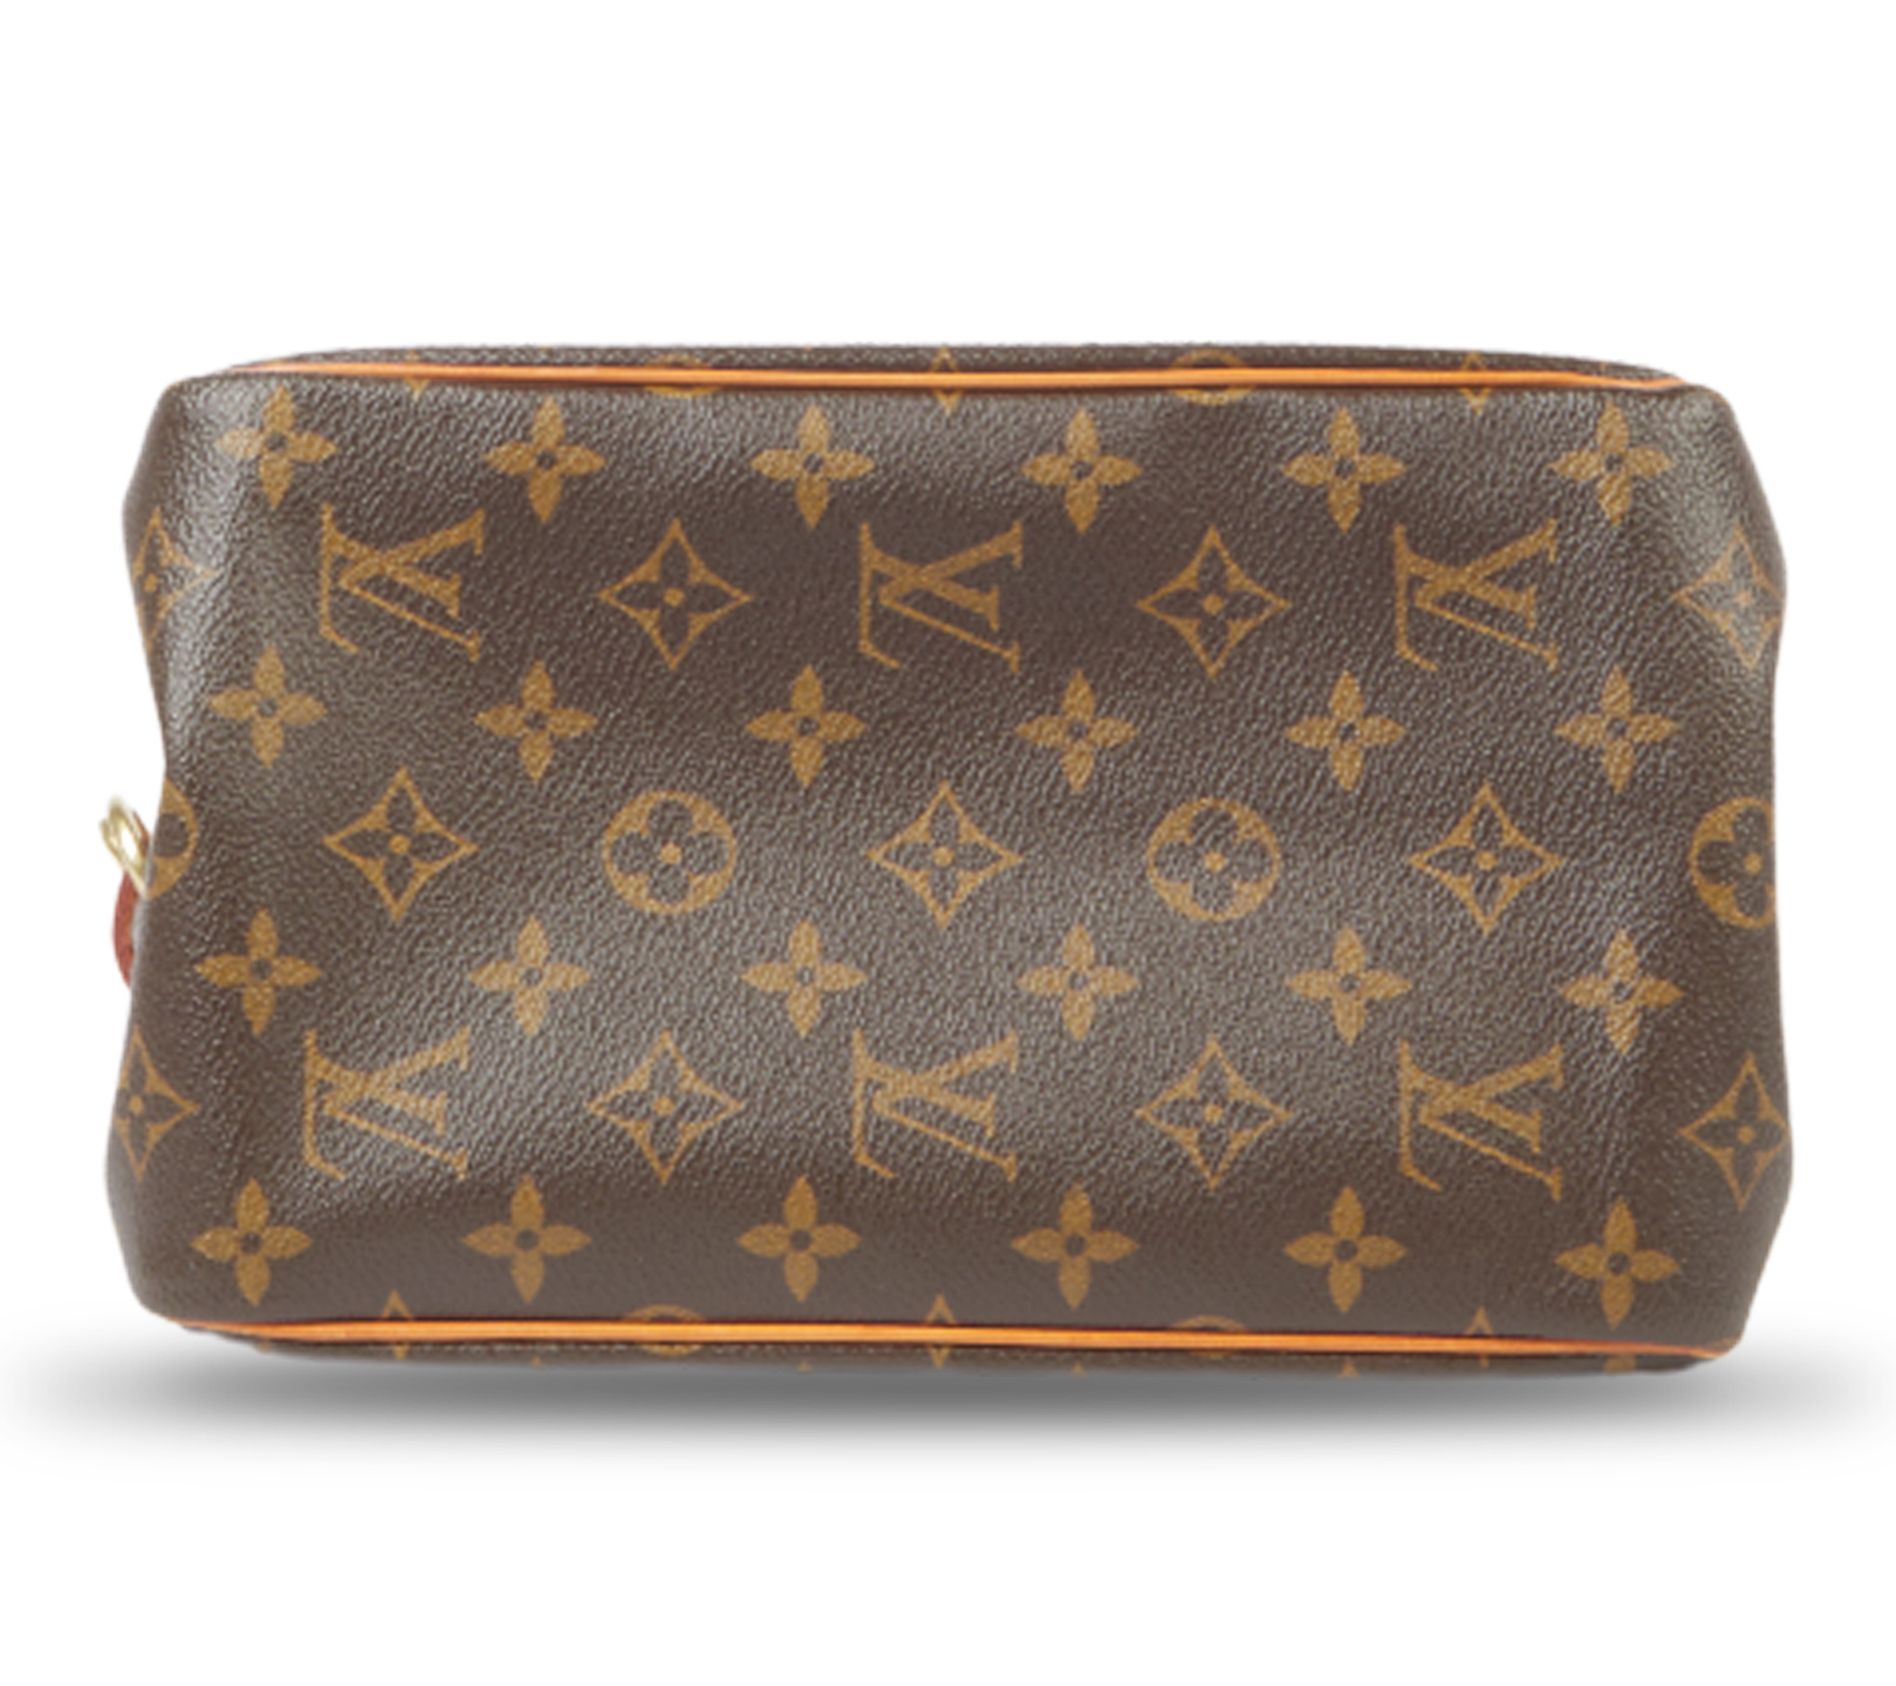 A Guide to Authenticating a Louis Vuitton Batignolles Purse (Authenticating  Louis Vuitton) See more